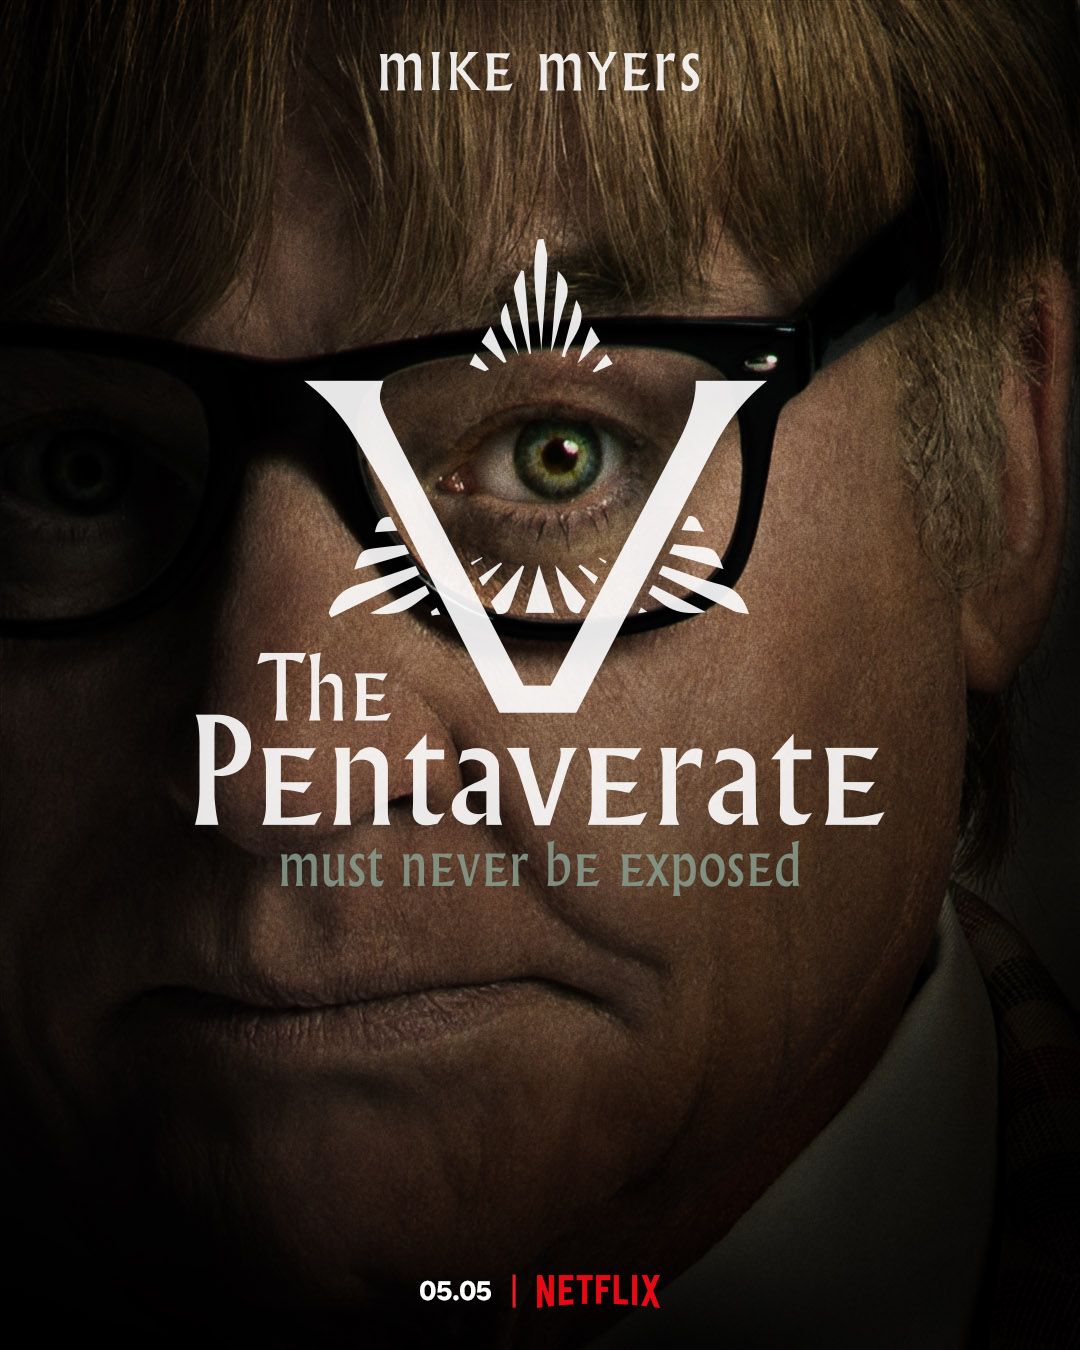 https://static1.colliderimages.com/wordpress/wp-content/uploads/2022/03/the-pentaverate-myers.jpg